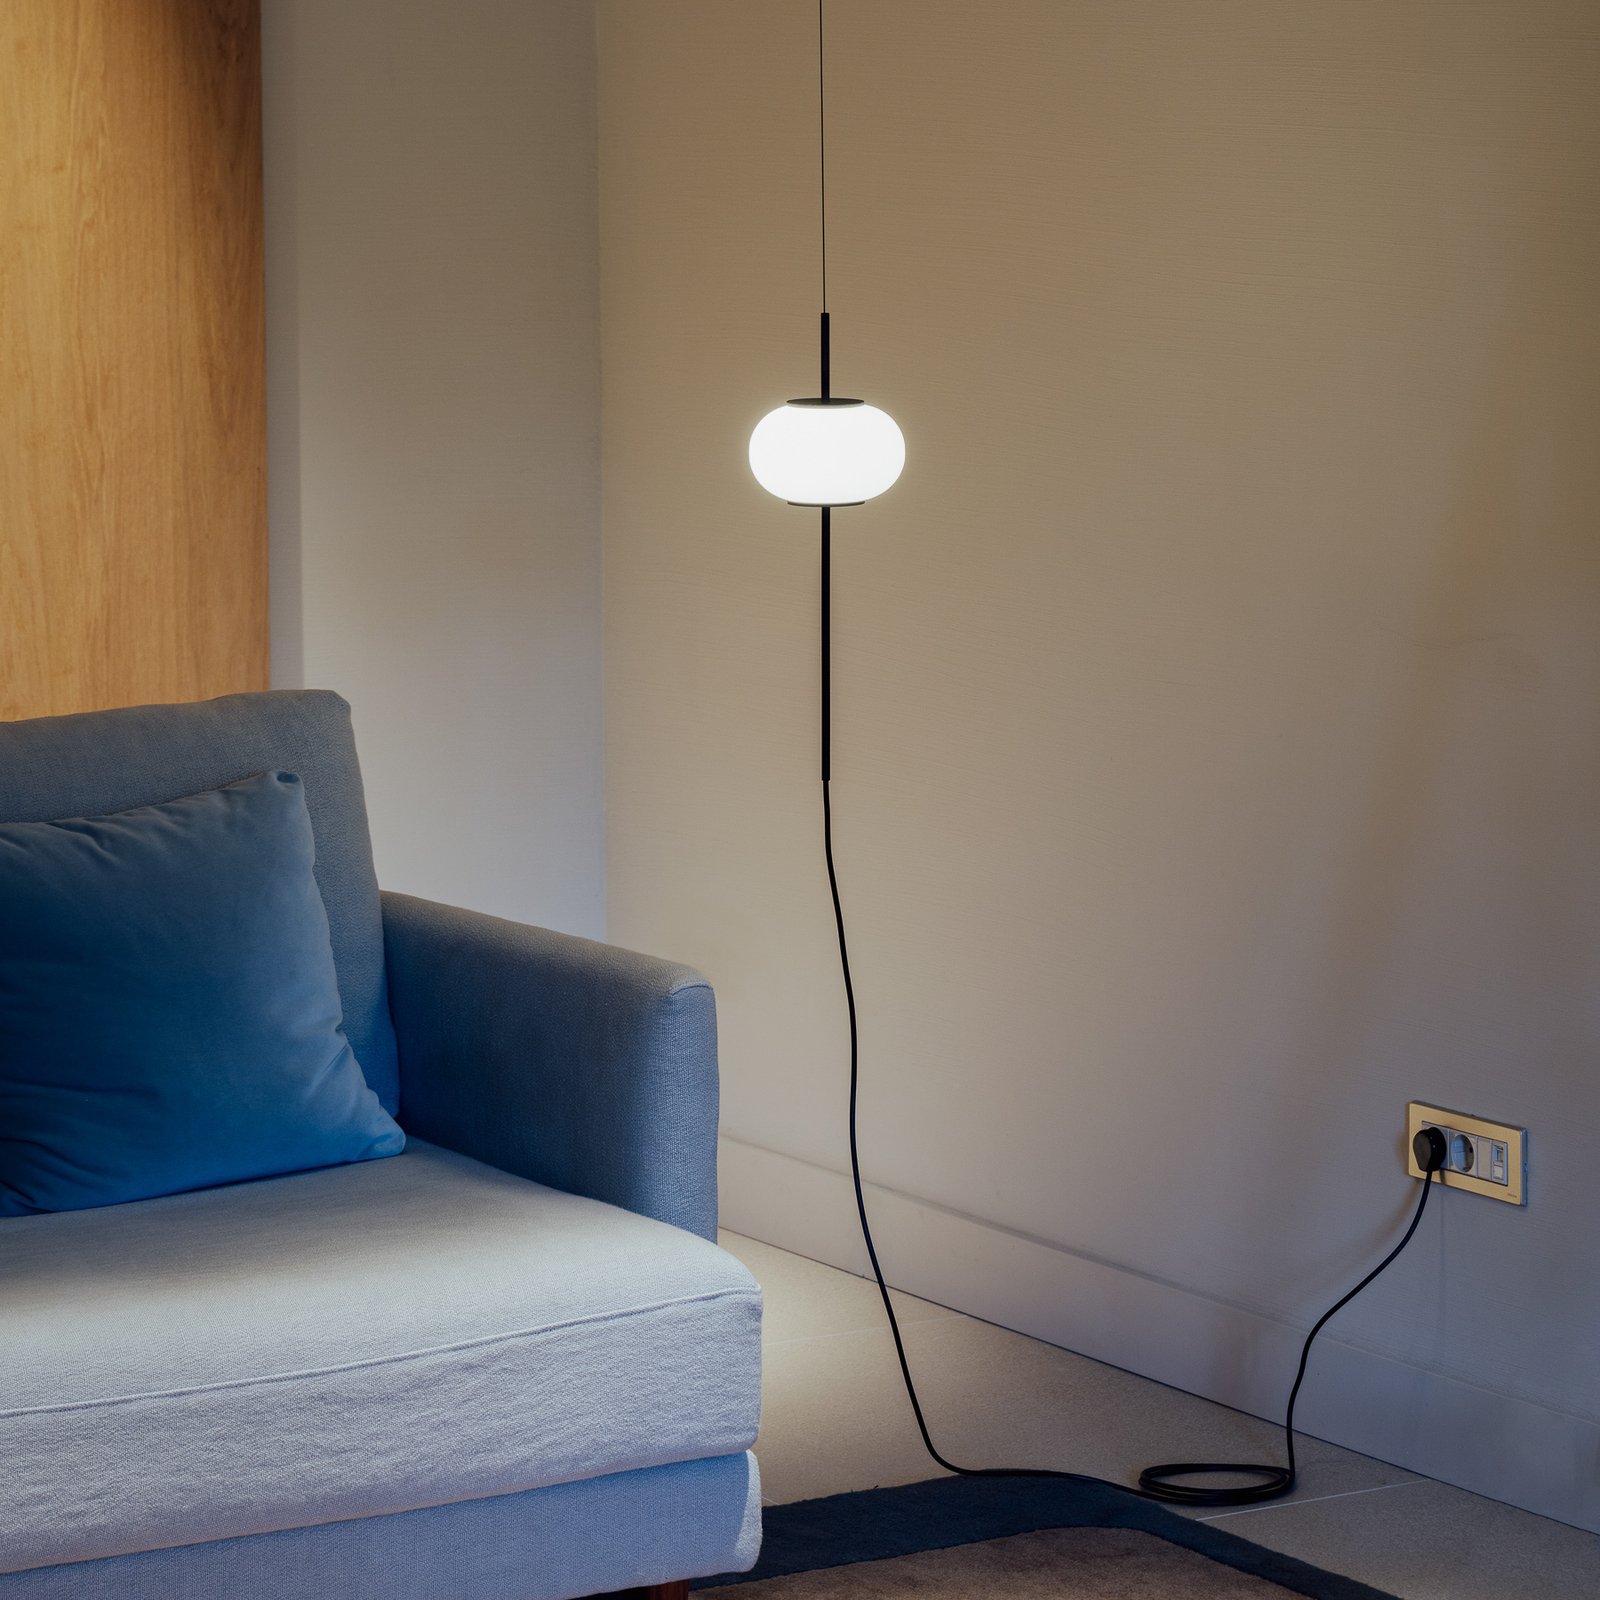 Milan Astros hanging light with a plug, adjustable